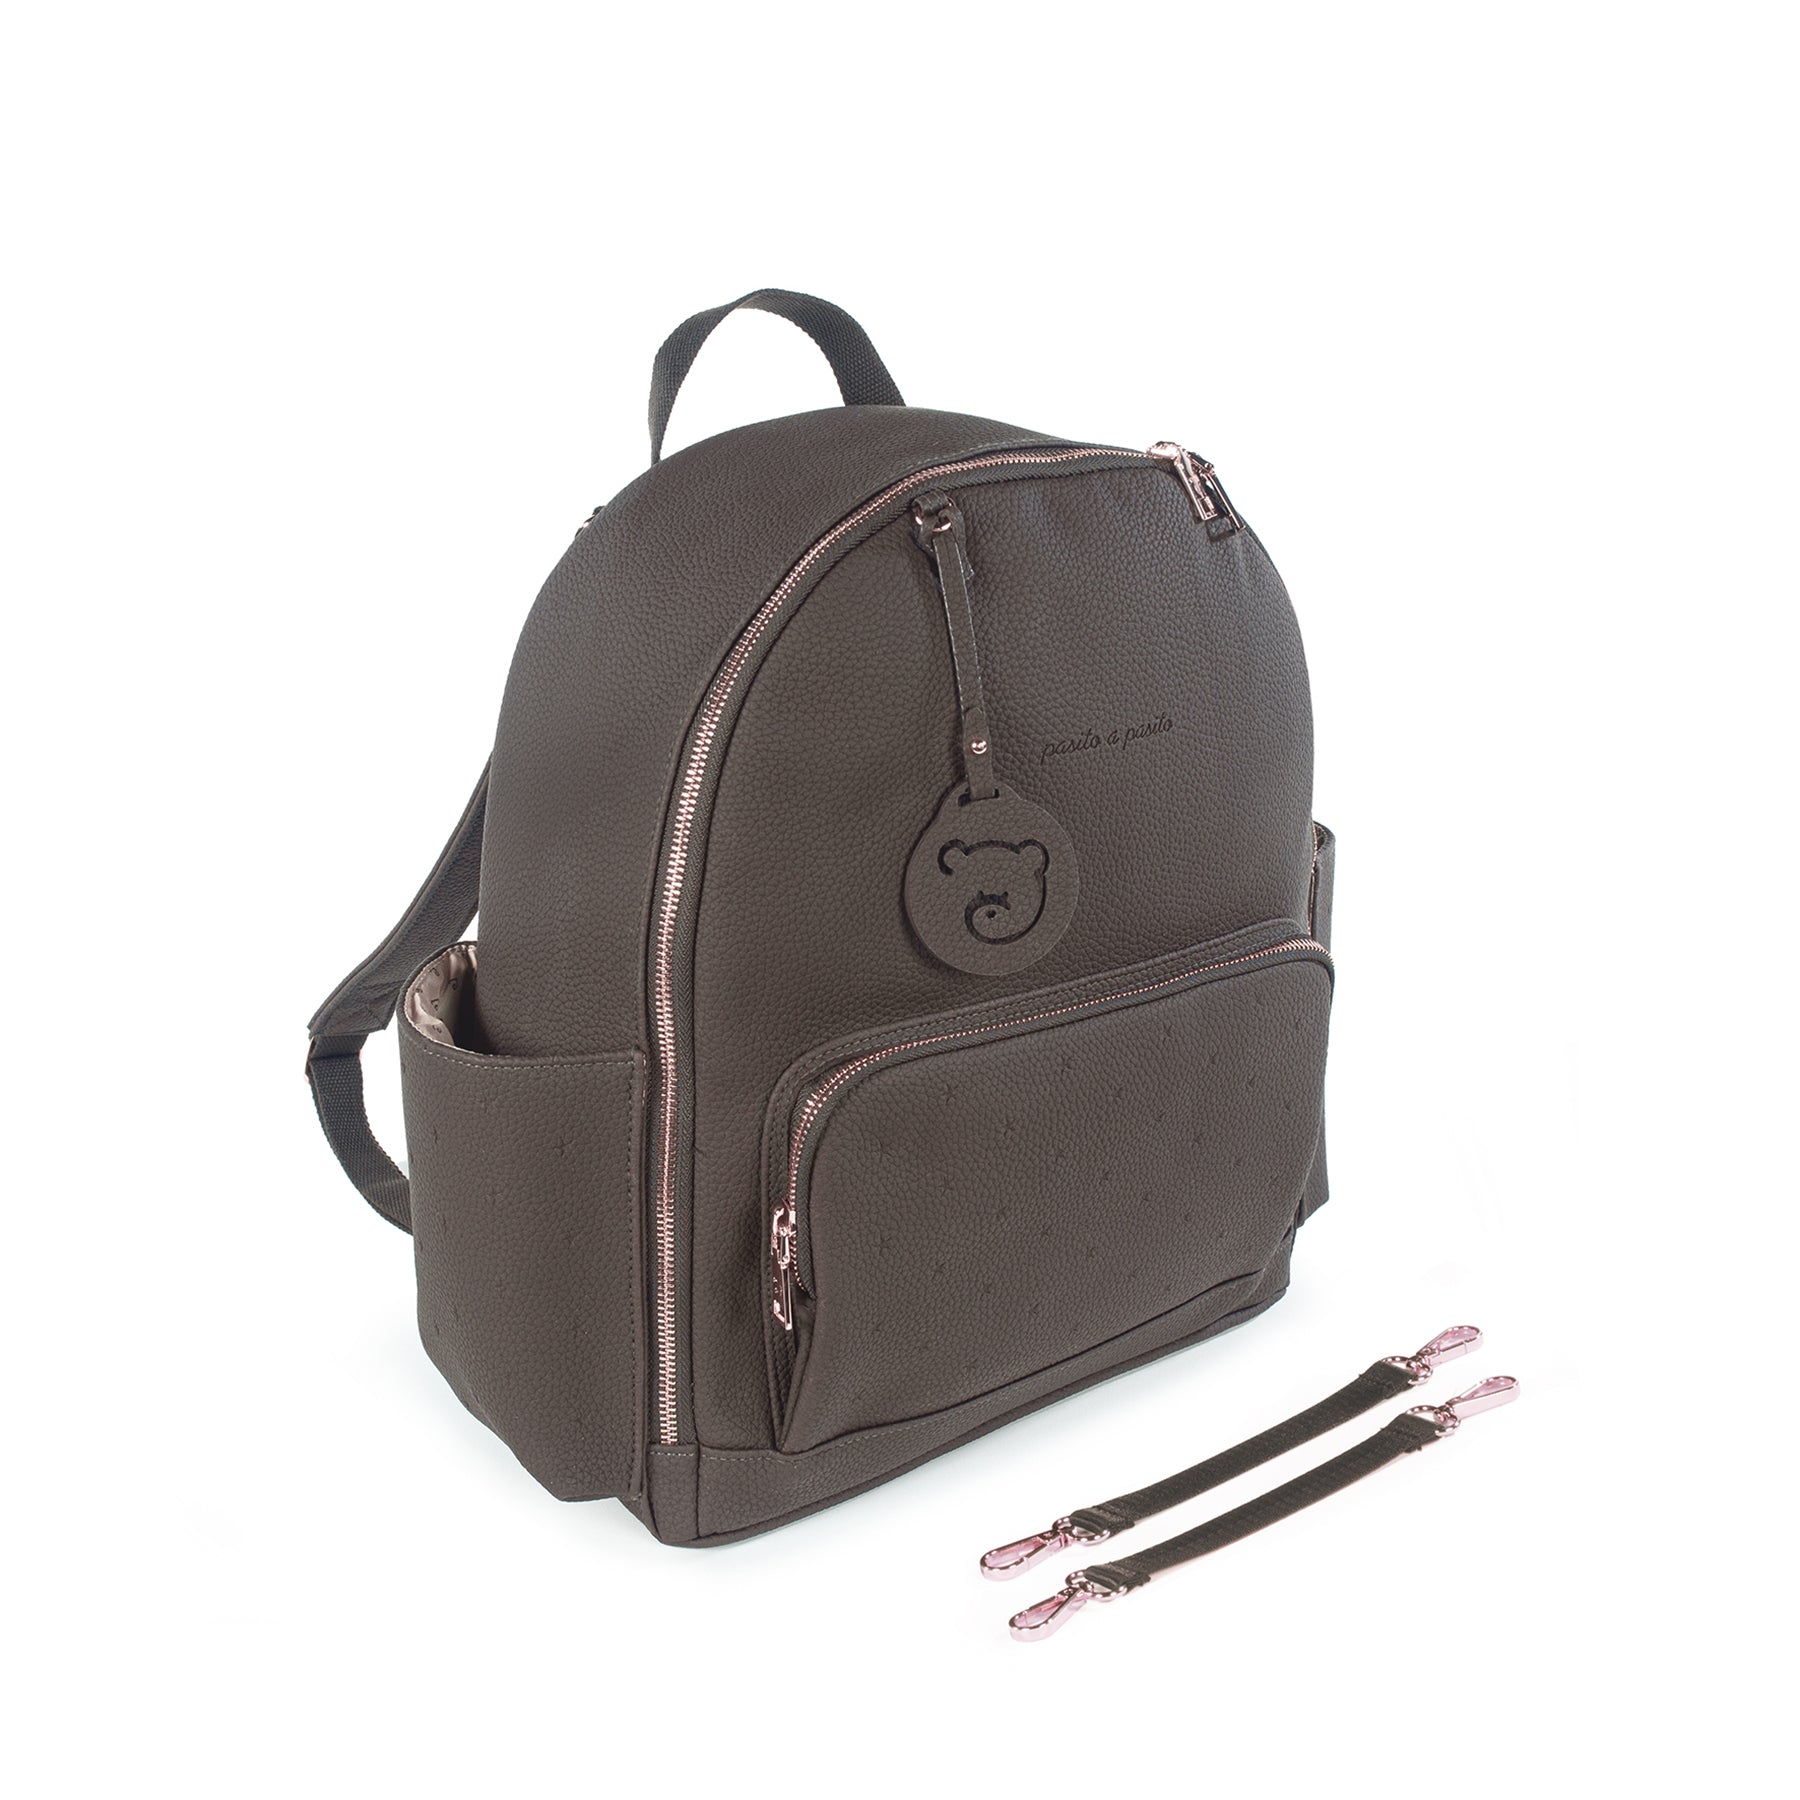 Pasito a Pasito London Coffee Backpack Diaper Changing Bag